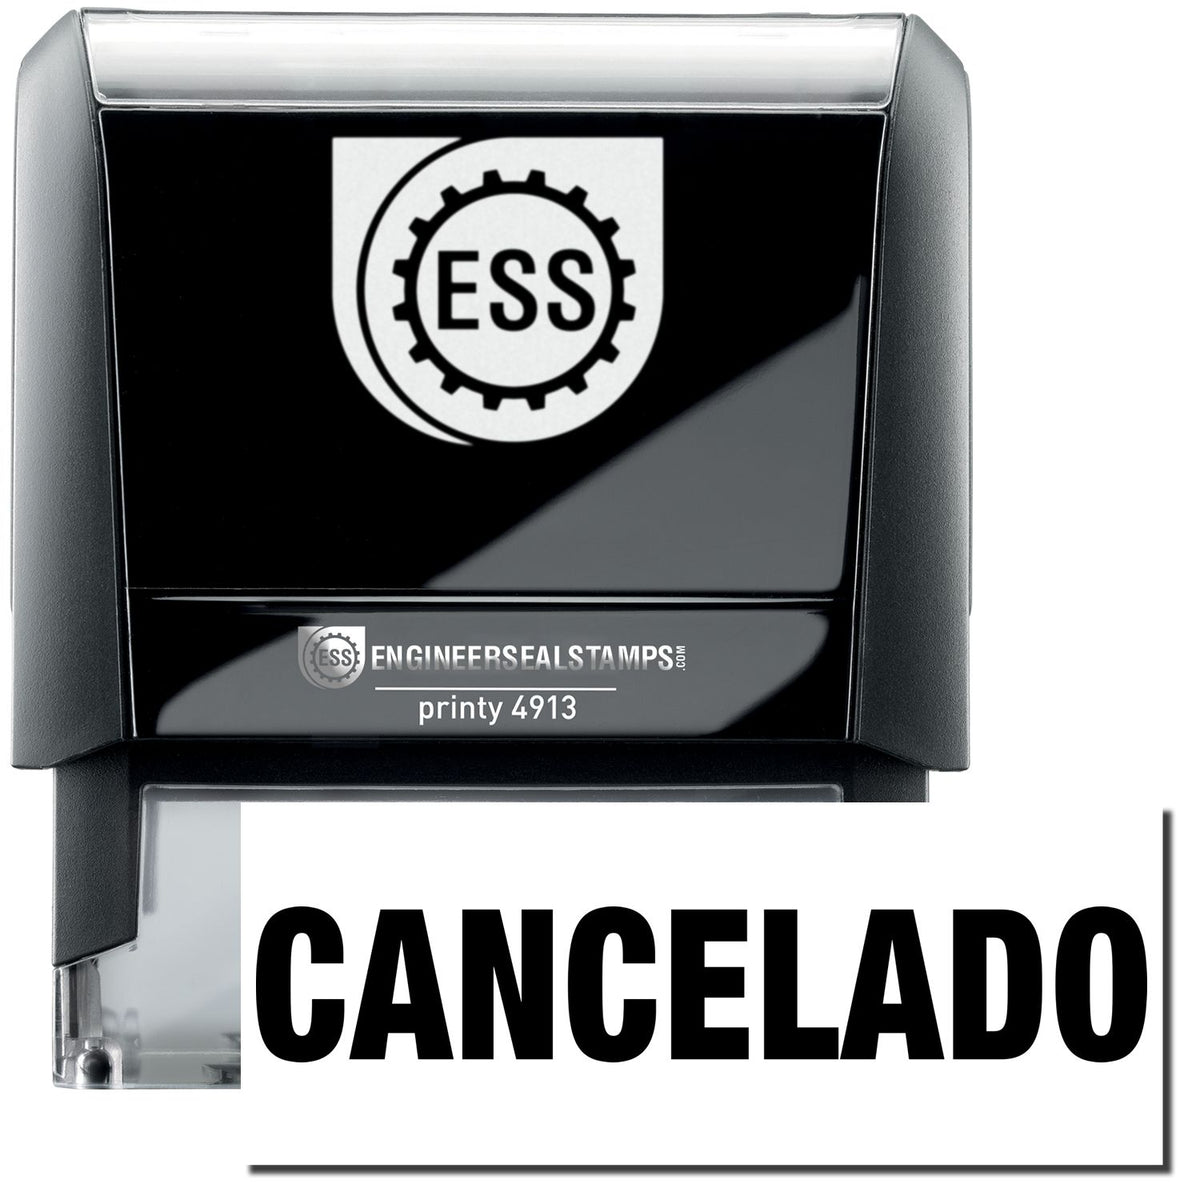 A self-inking stamp with a stamped image showing how the text &quot;CANCELADO&quot; in a large font is displayed by it after stamping.